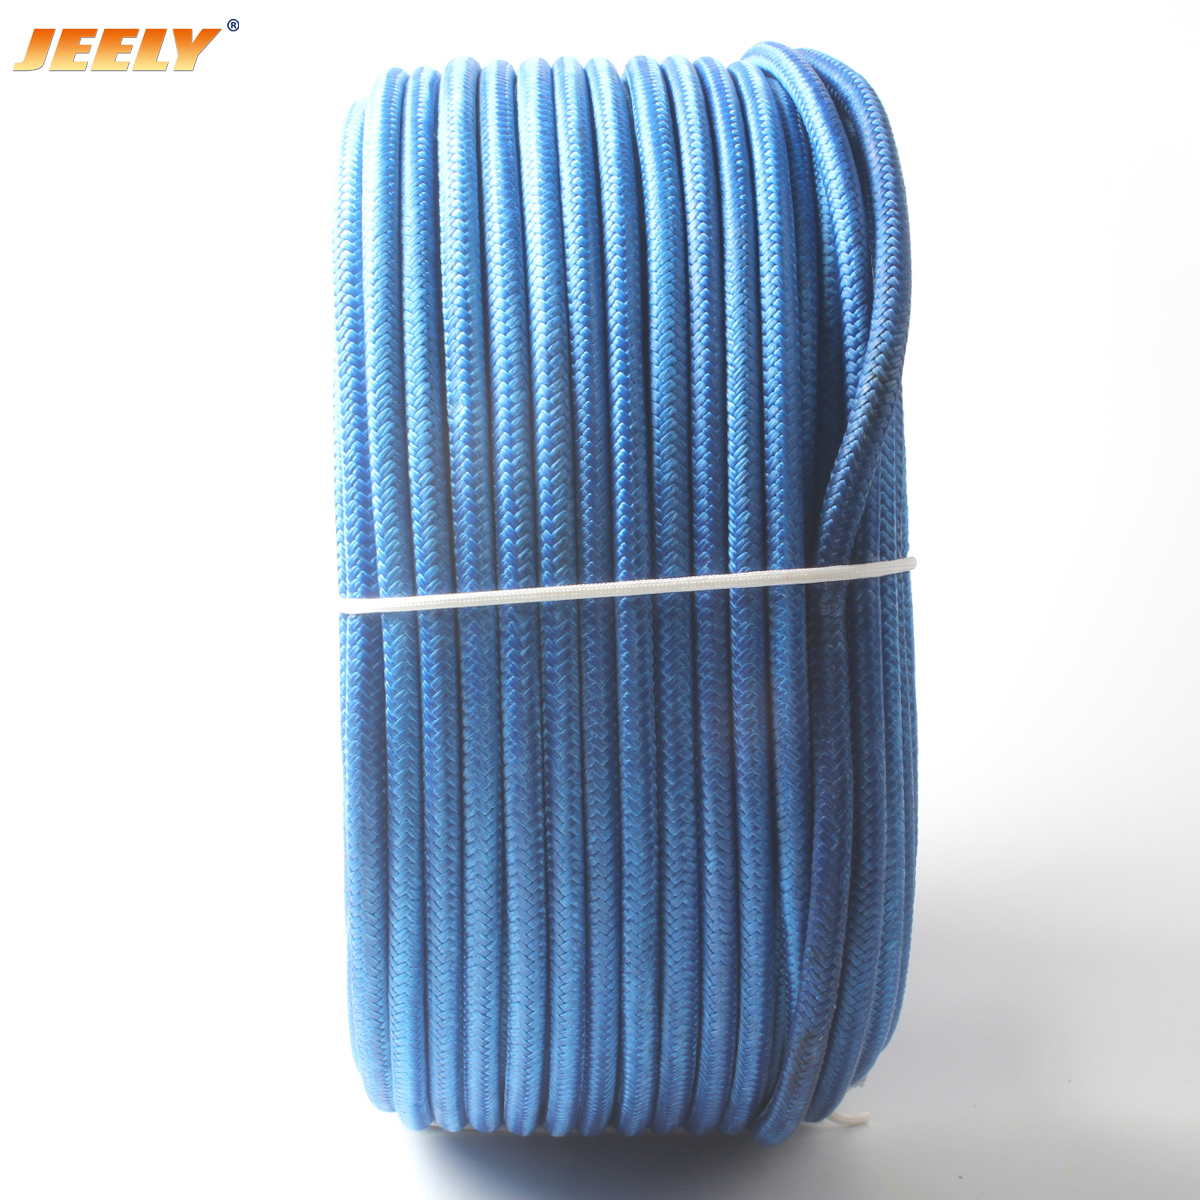 14mm 100m UHMWPE Spectra Core with UHMWPE Jacket Sailboat Winch Spectra Sheathed Tow Rope